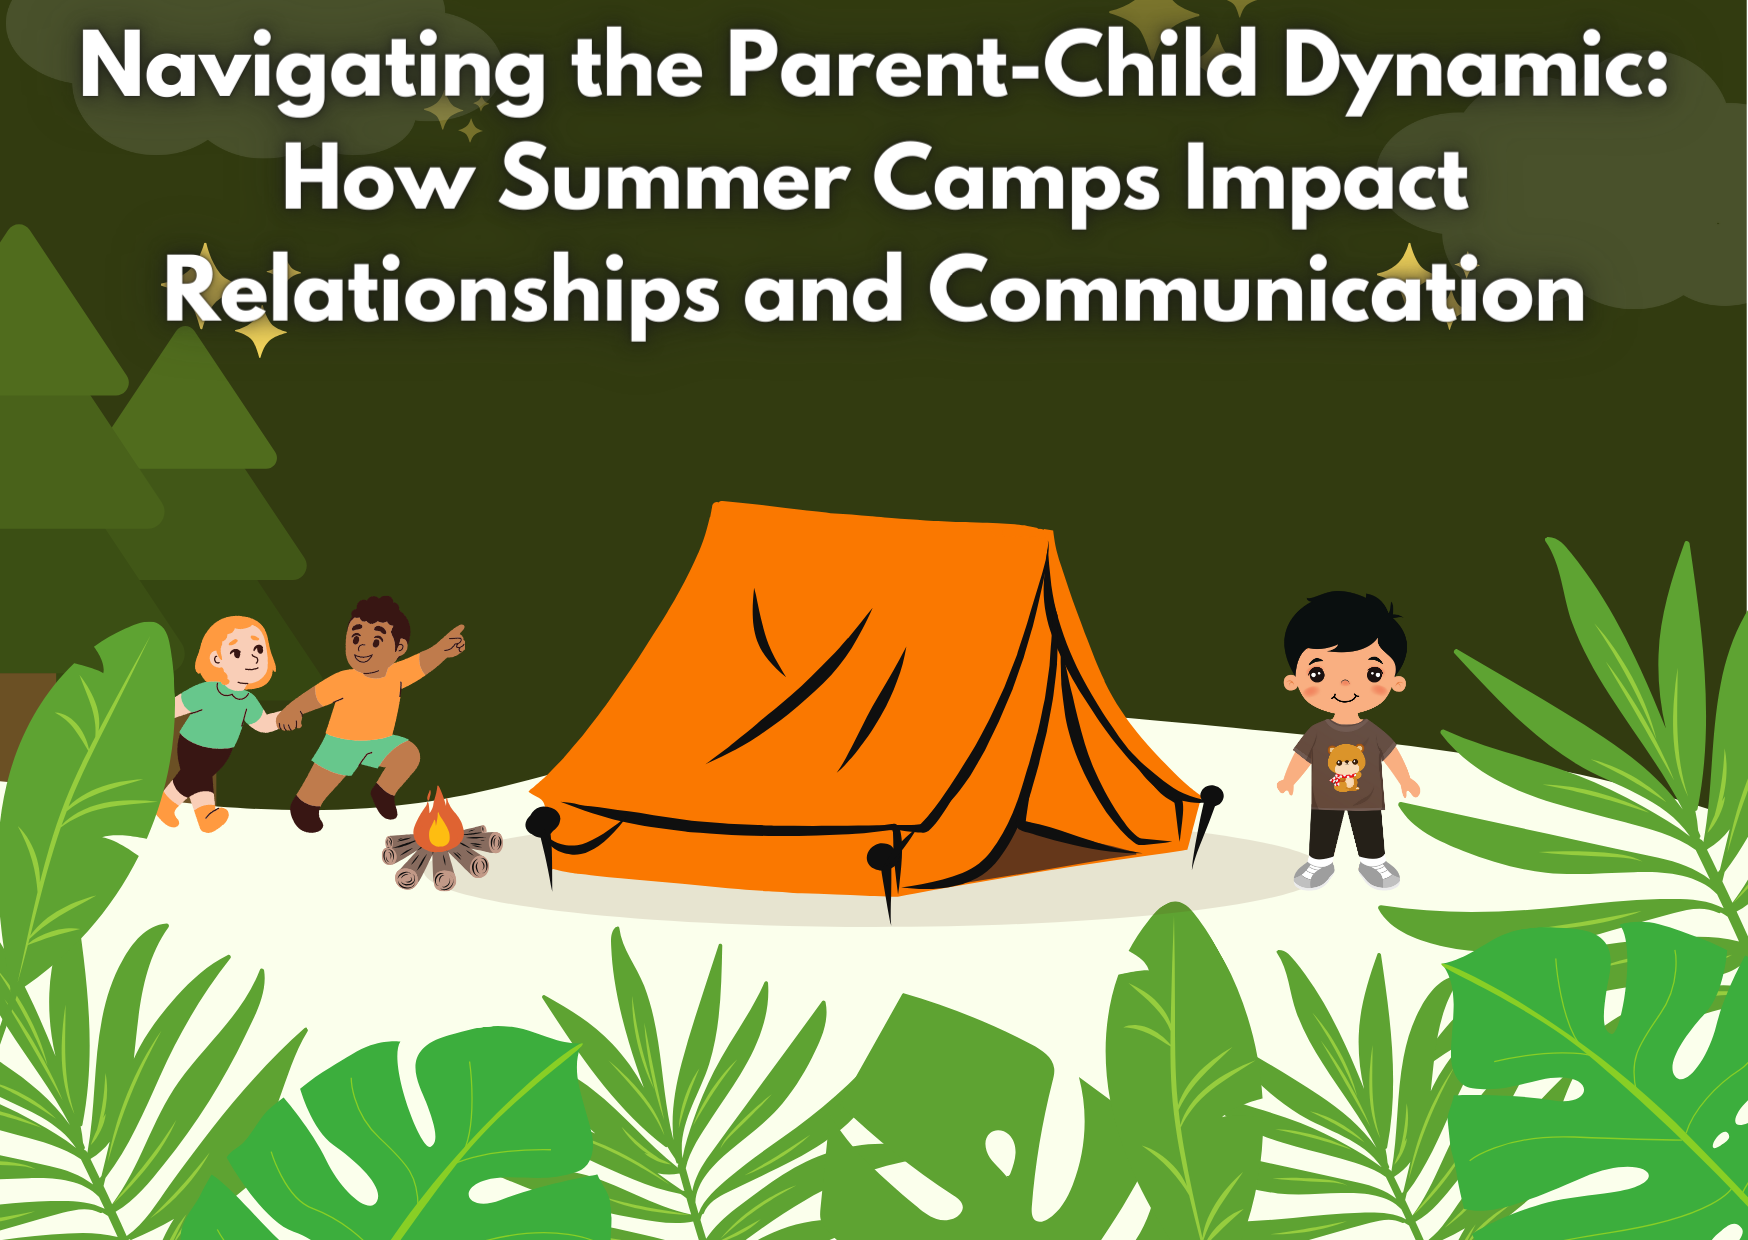 Navigating the Parent-Child Dynamic: How Summer Camps Impact Relationships and Communication